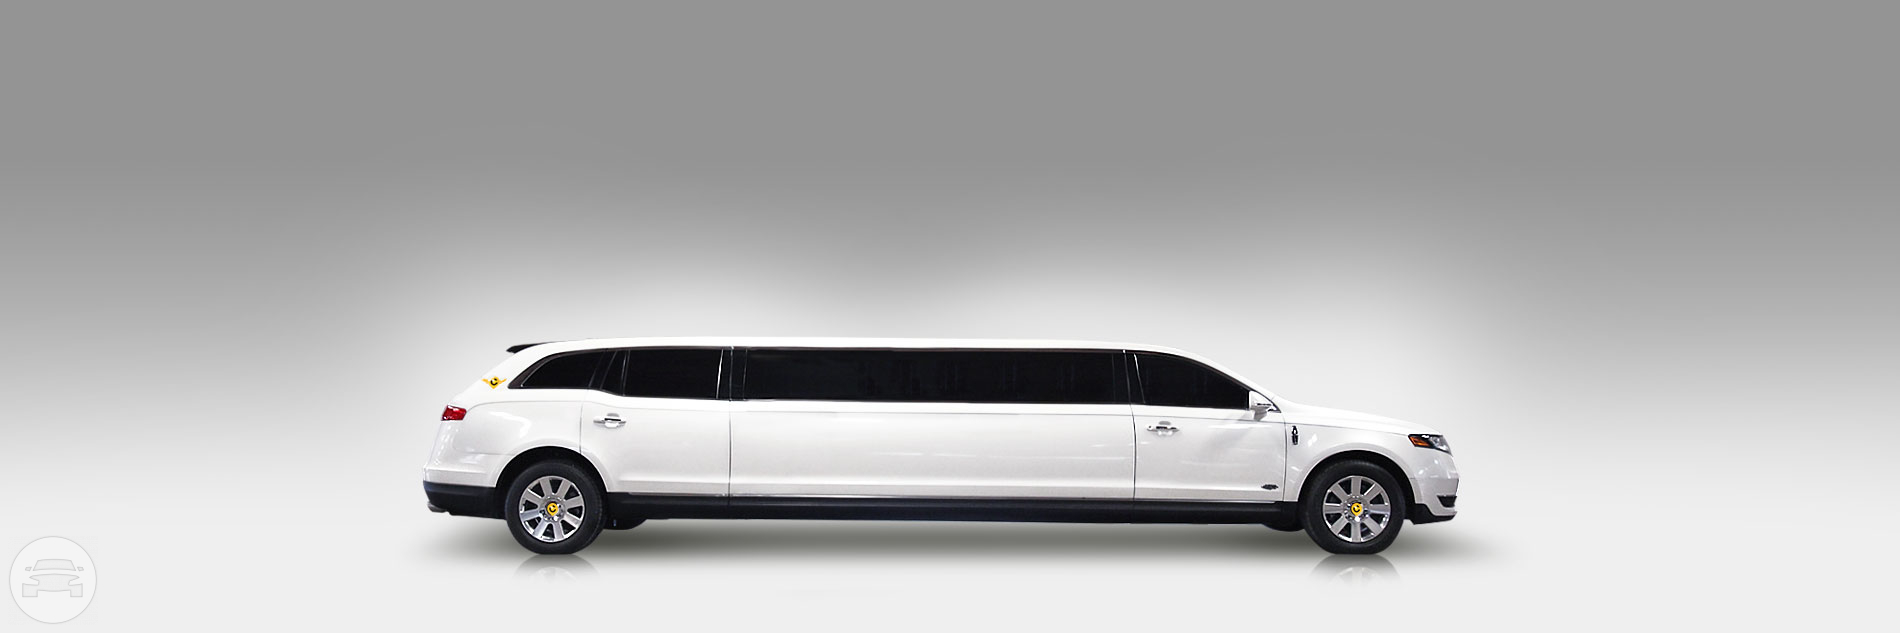 White - Lincoln MKT Stretch Limo
Limo /
Pearland, TX

 / Hourly $0.00
